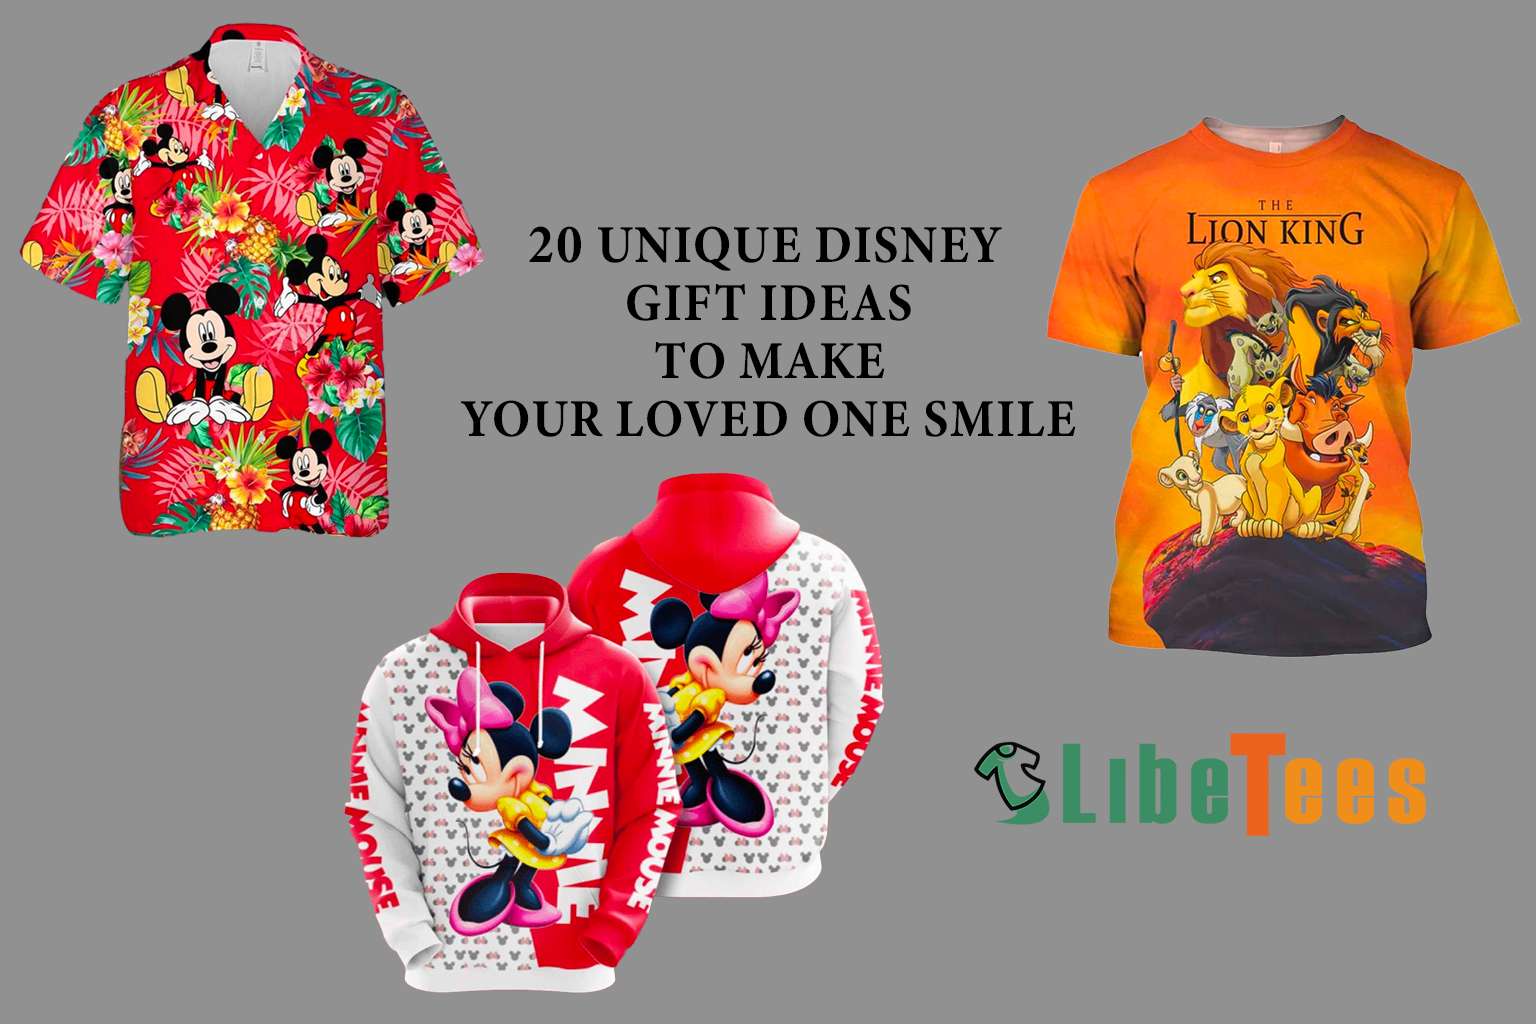 20 Unique Disney Gift Ideas to Make Your Loved One Smile